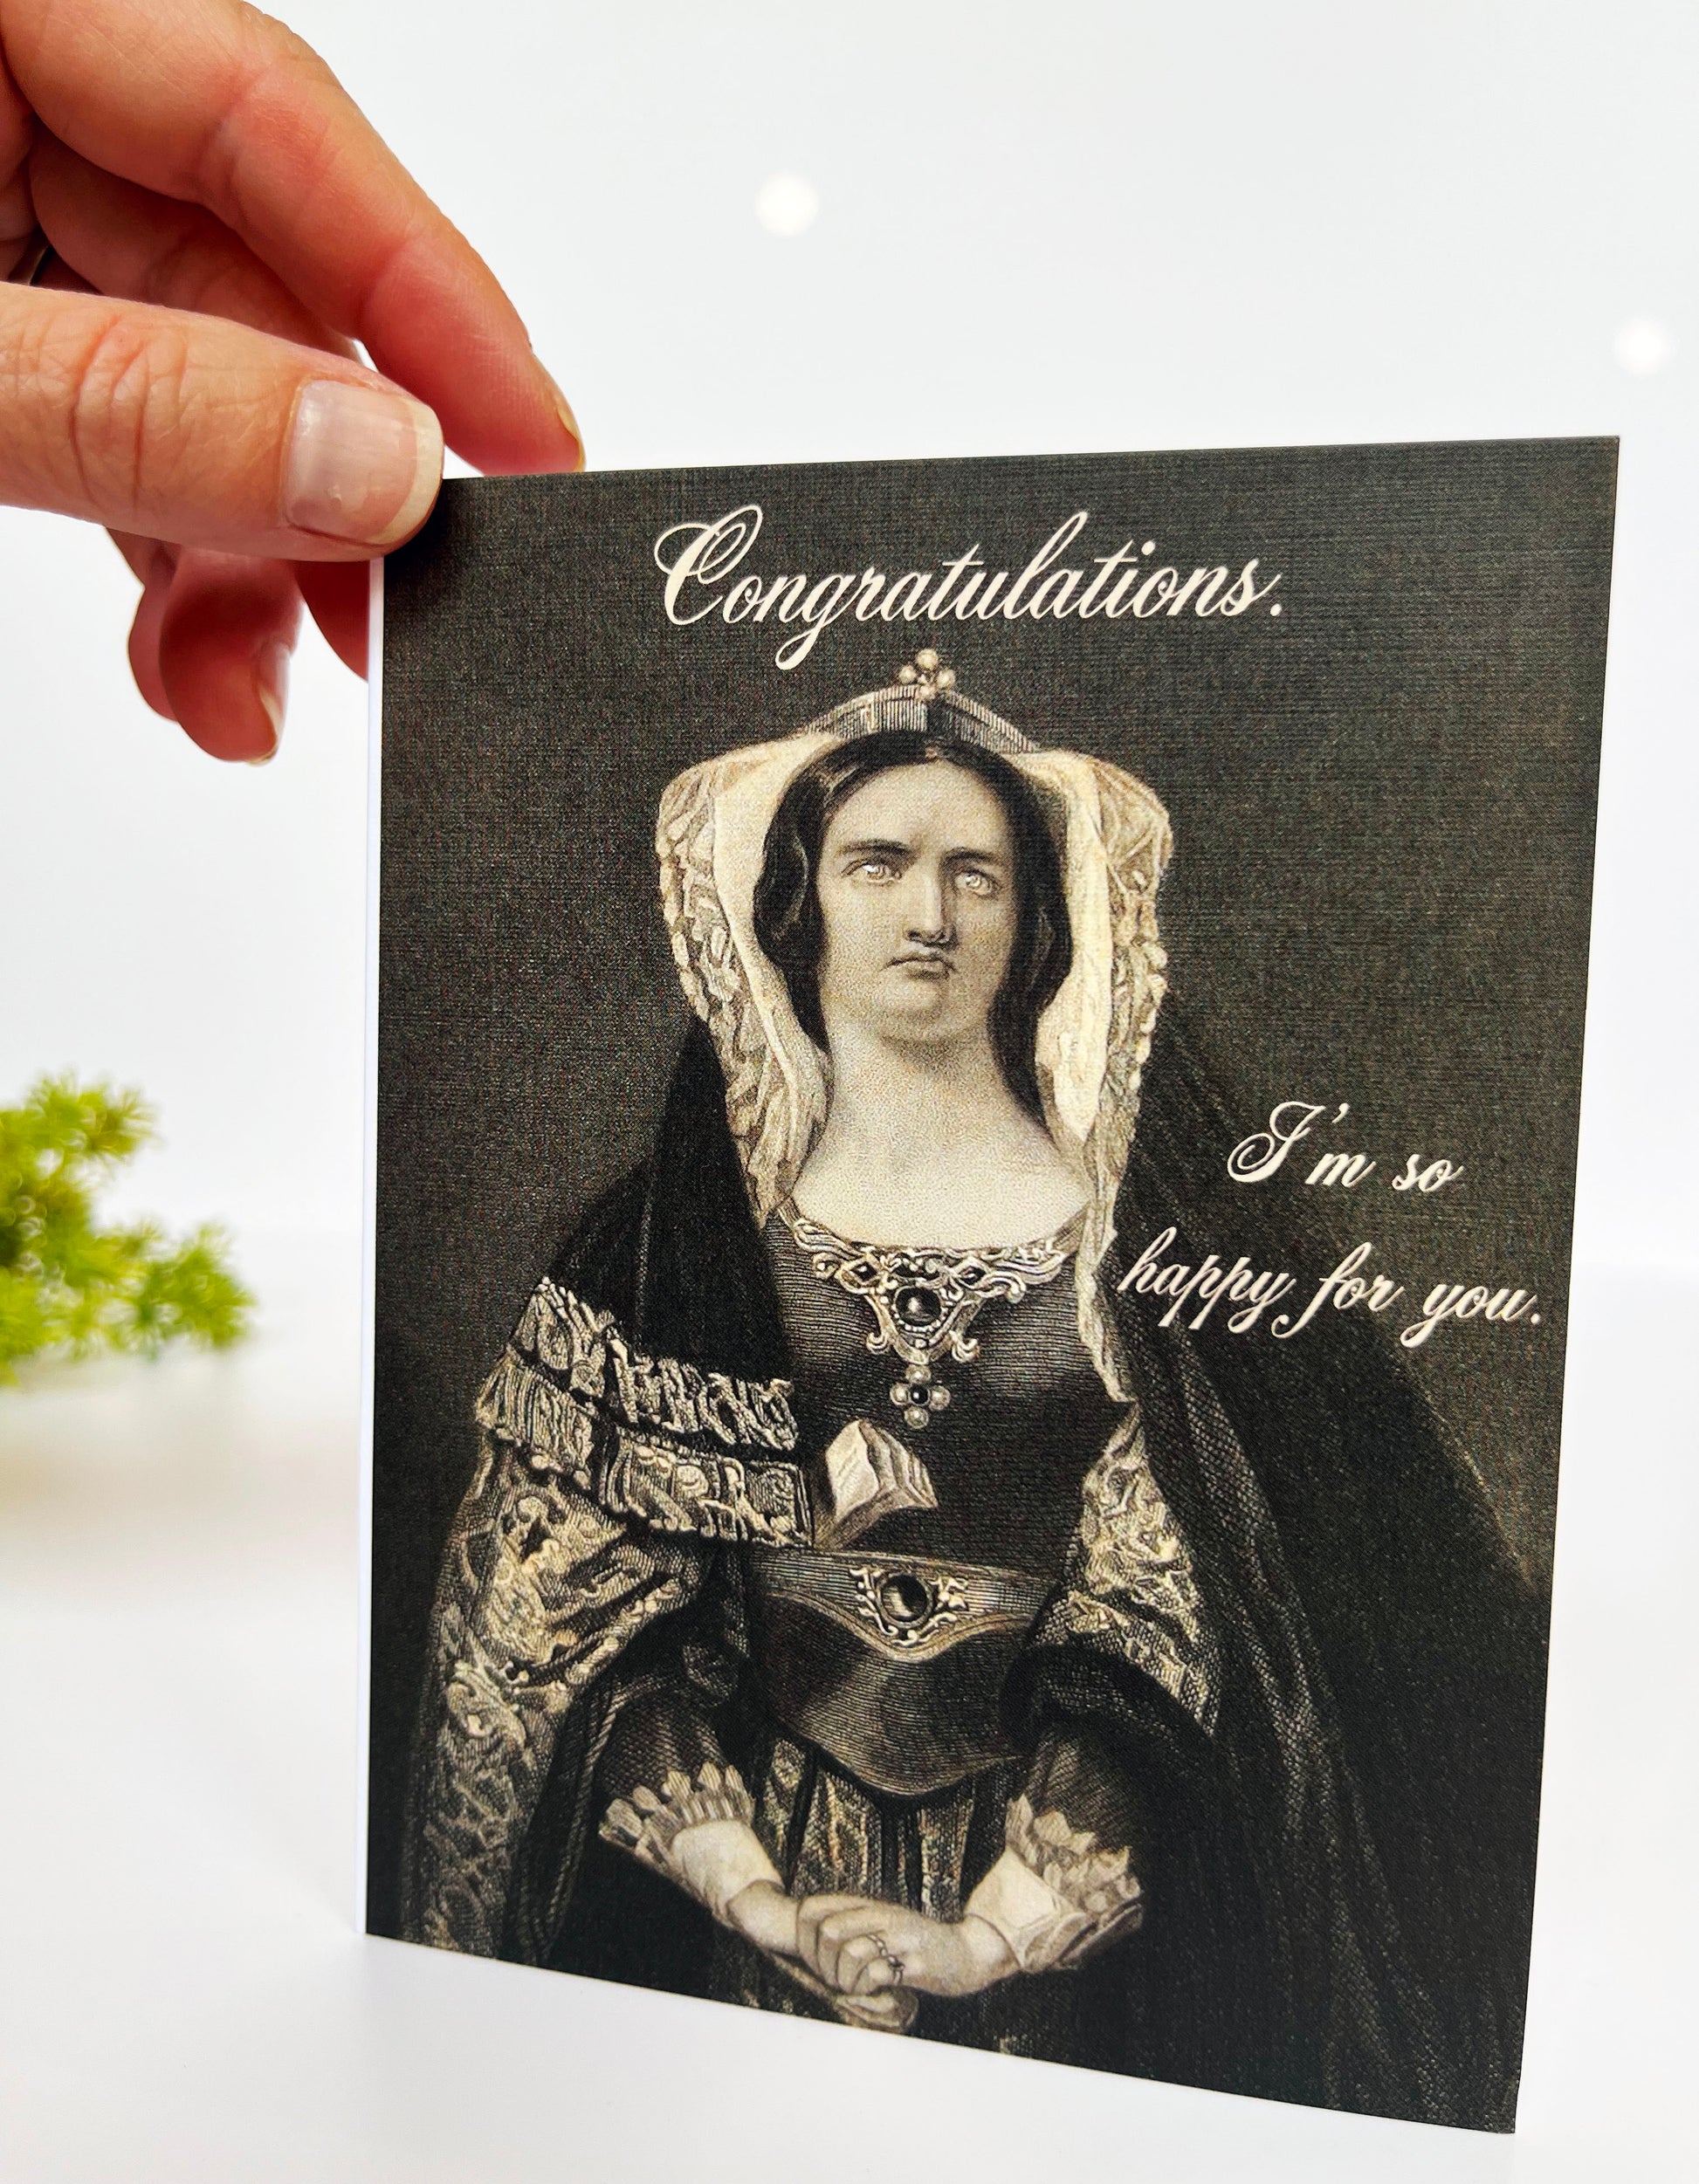 congratulations im so happy for you greeting card coin laundry retro vintage style woman portrait sarcastic retro funny fun cards